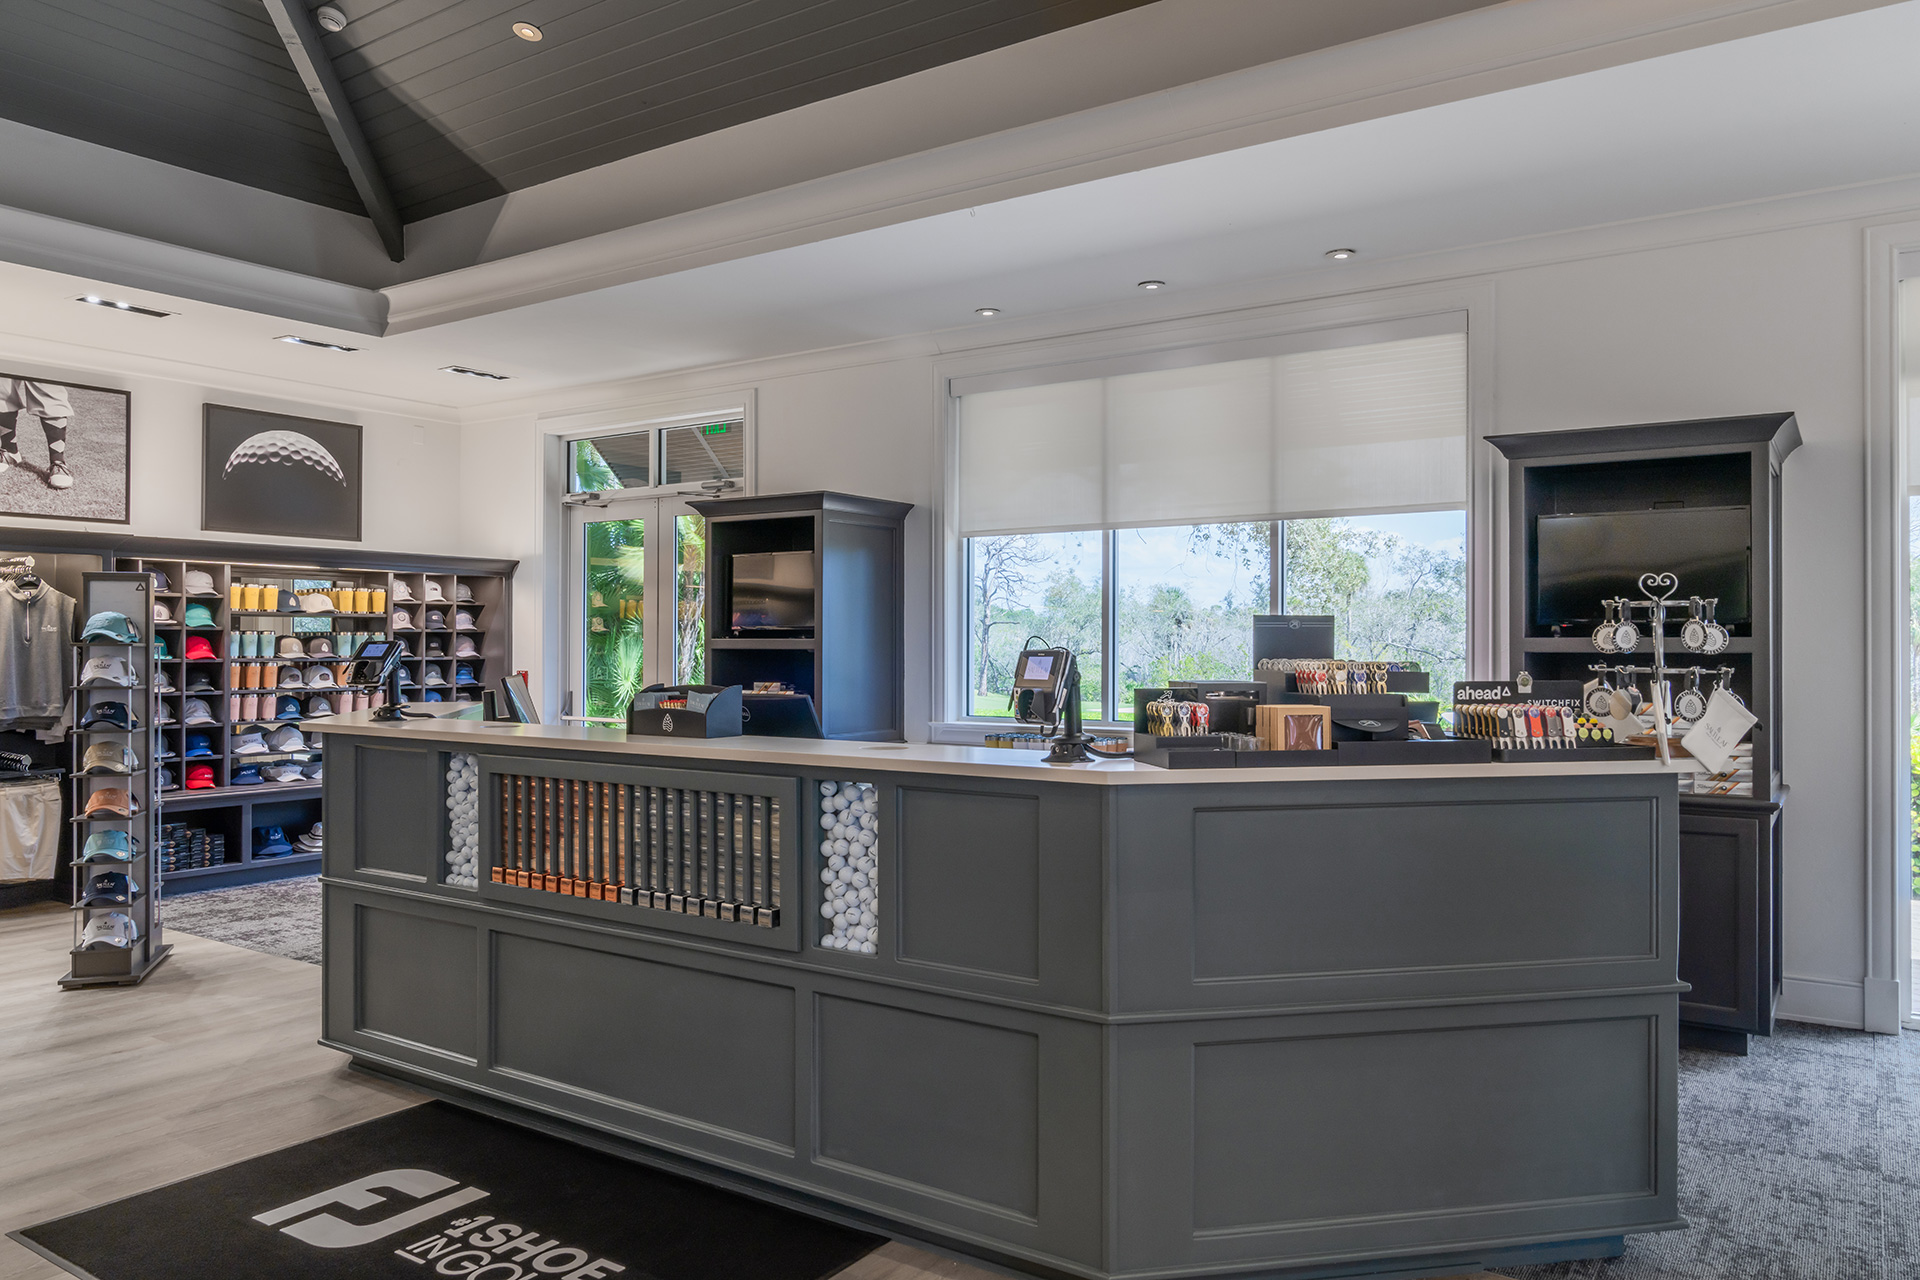 A golf shop located at the Saltleaf Golf Preserve in Bonita Springs, equipped with a counter and shelves.